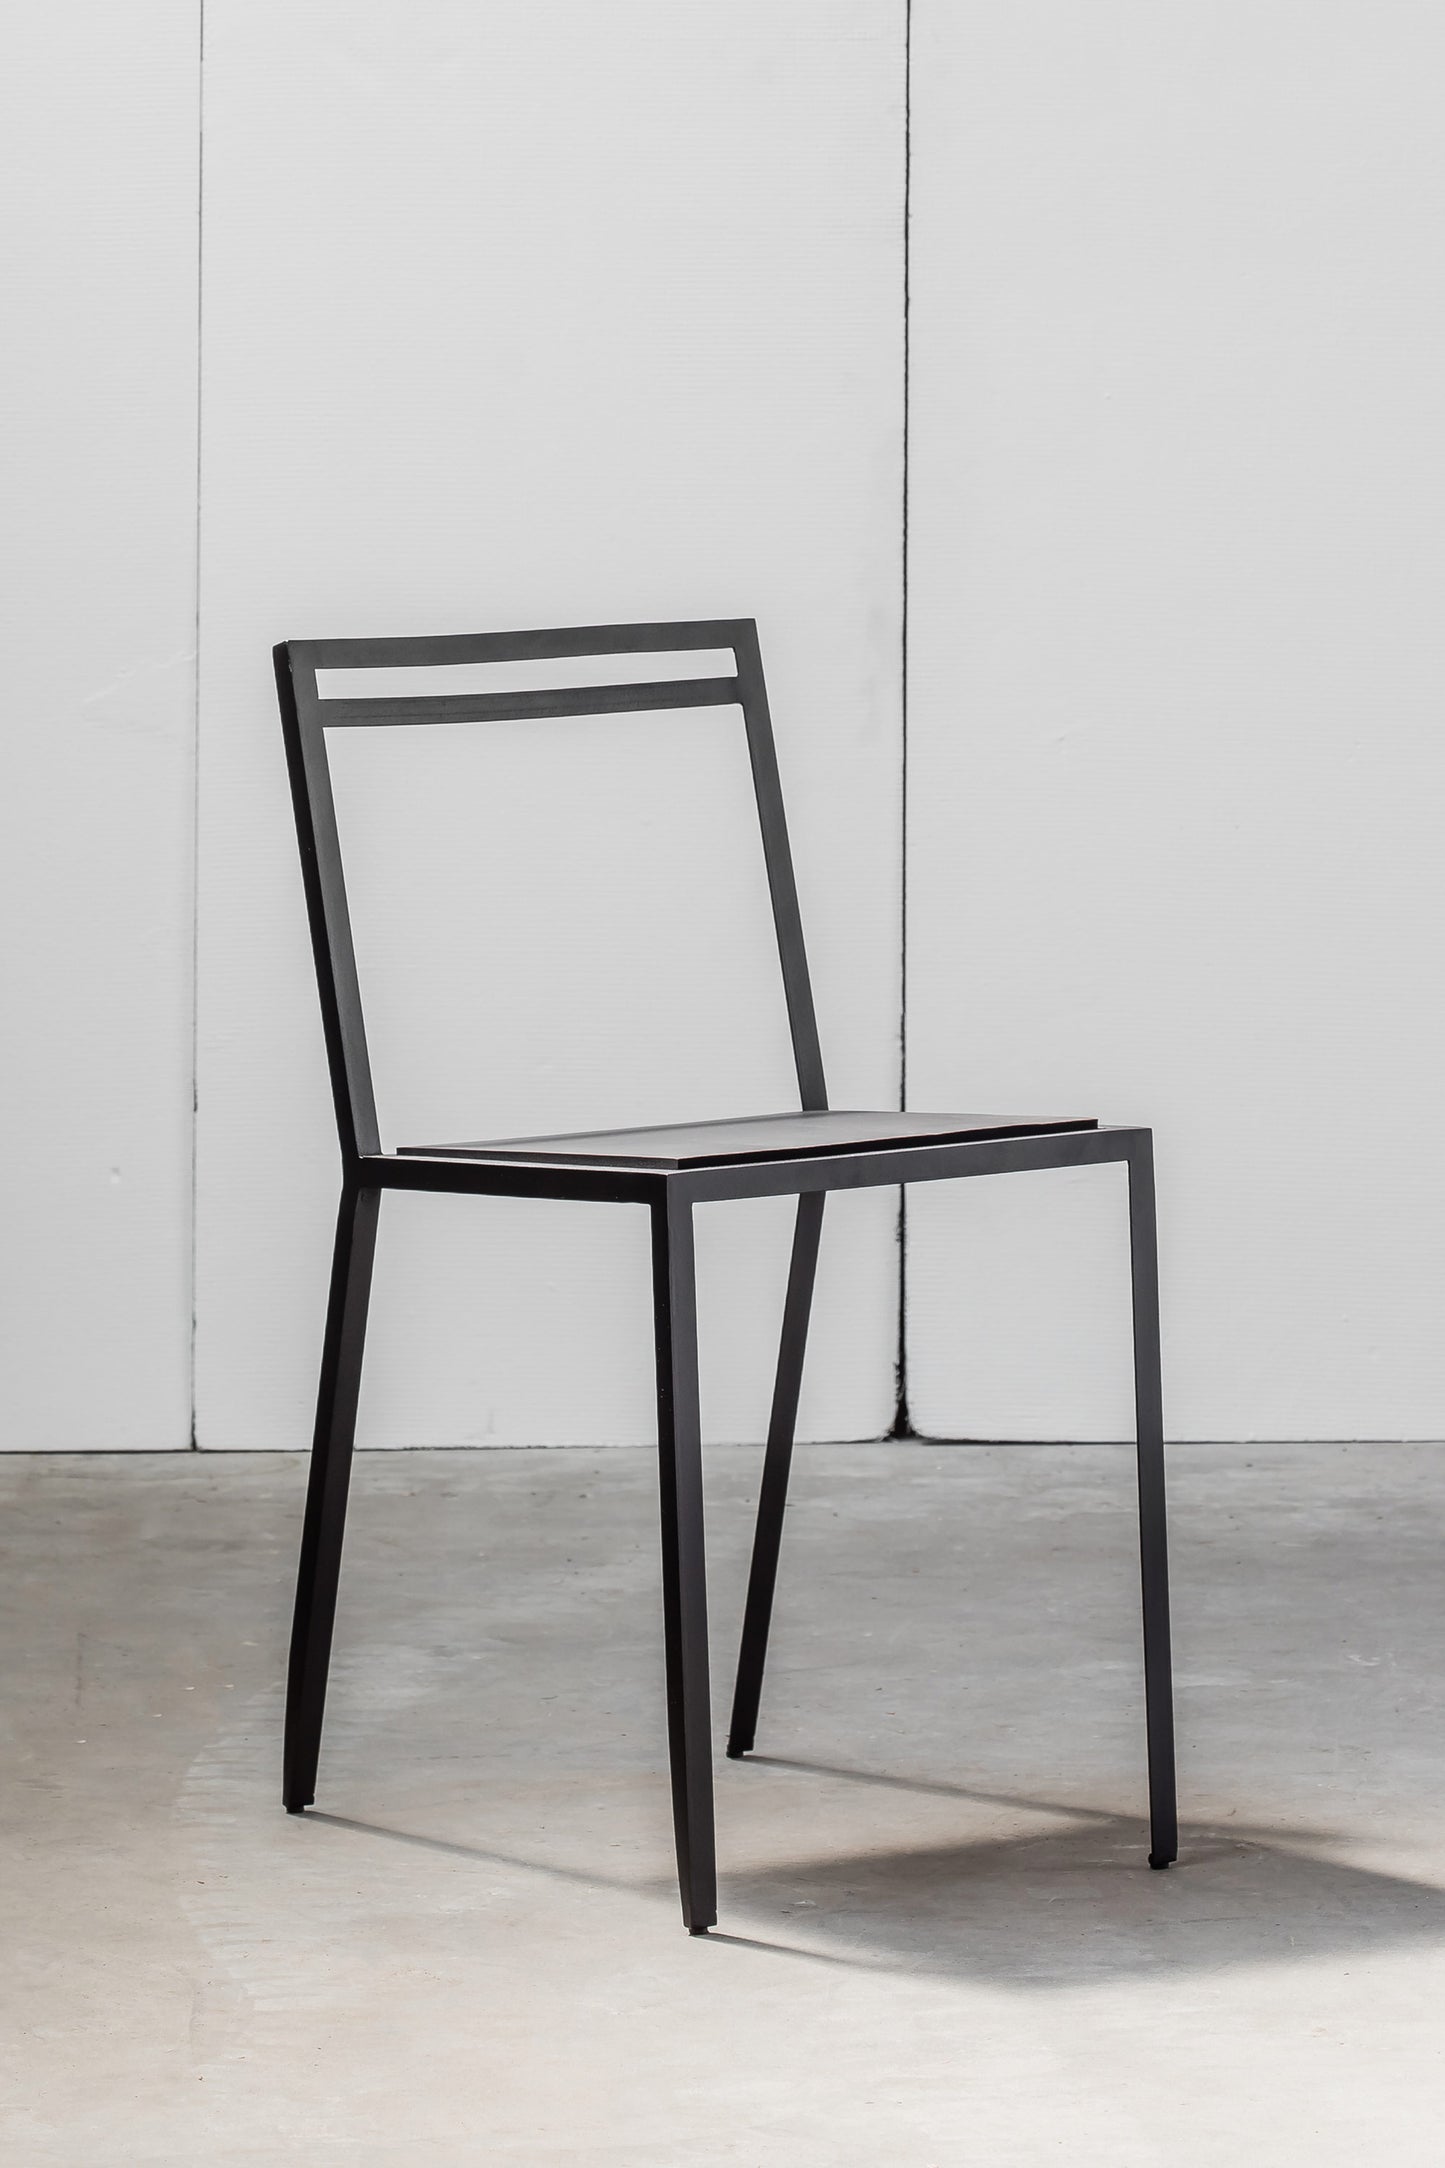 Rubber Chair by Heerenhuis made from black hand-welded metal and thick rubber for seating.